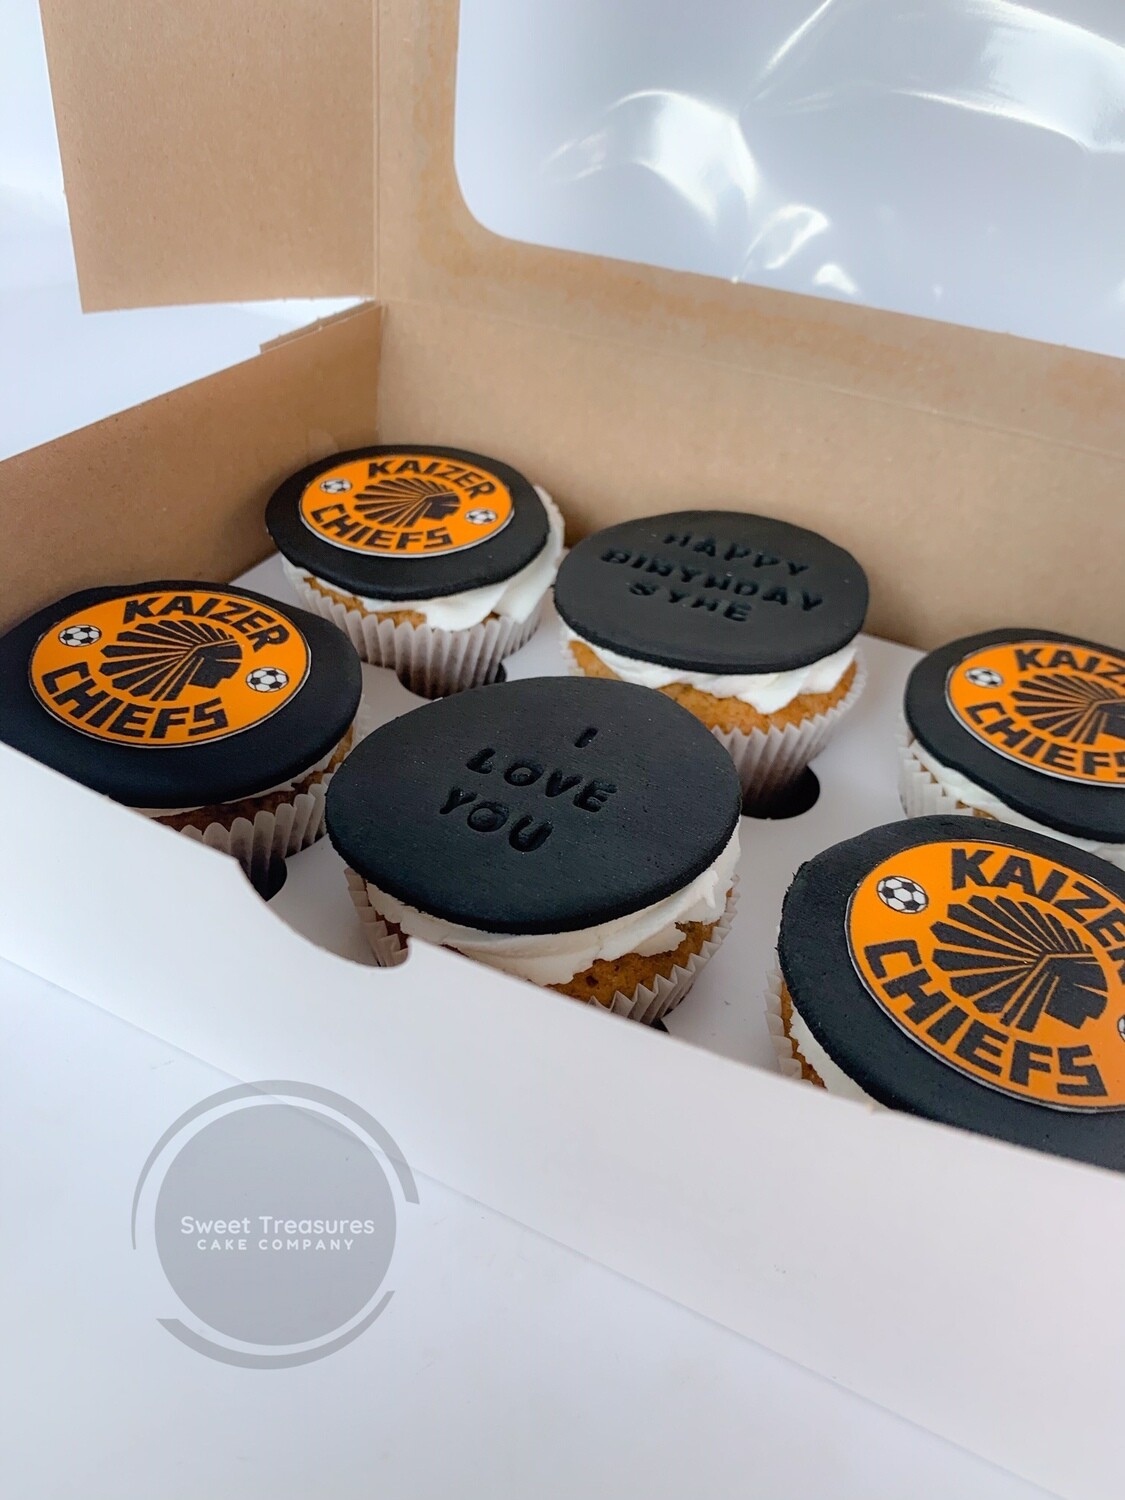 Kaizer chiefs themed Cupcakes